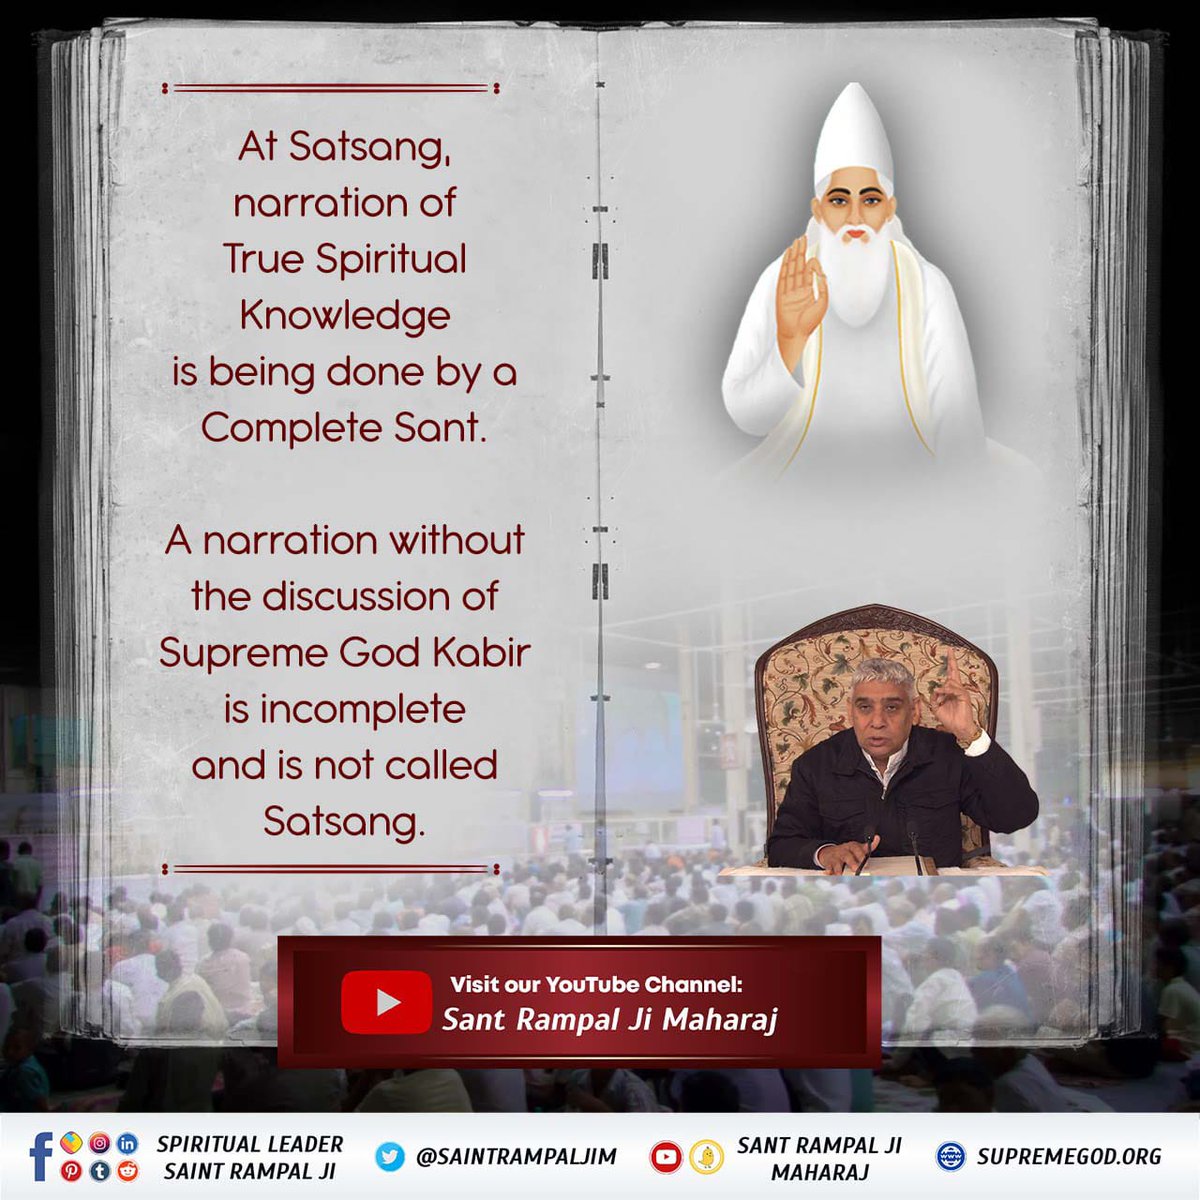 At Satsang, narration of True Spiritual Knowledge is being done by a Complete Sant.

A narration without the discussion of Supreme God Kabir is incomplete and is not called Satsang.

Visit our YouTube Channel: Sant Rampal Ji Maharaj

inSPIRITUAL LEADER SAINT RAMPAL JI